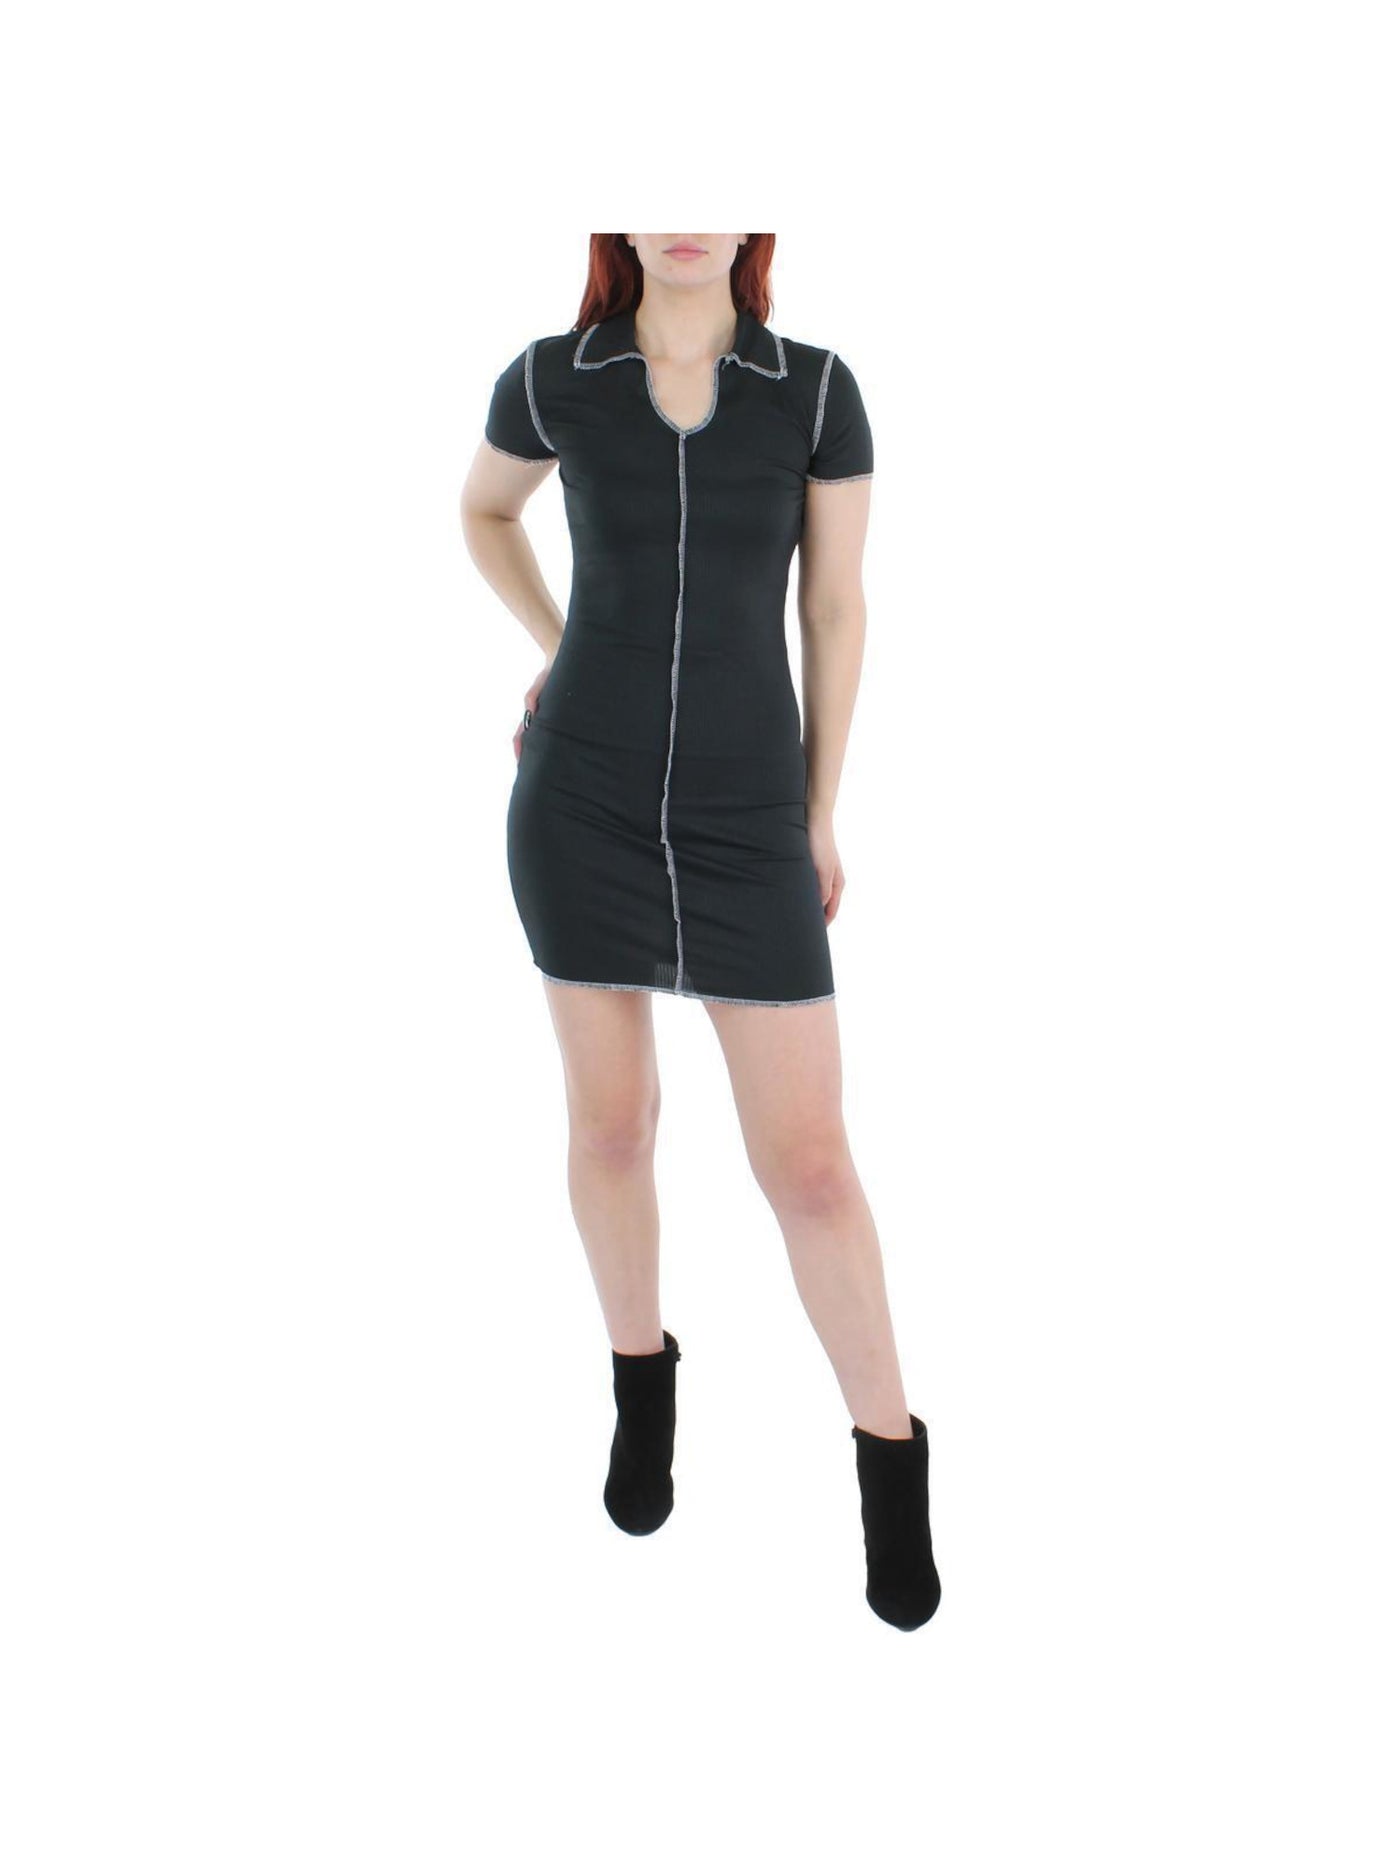 NO COMMENT Womens Black Fitted Ribbed Pullover Collared Short Sleeve Scoop Neck Short Shirt Dress Juniors L